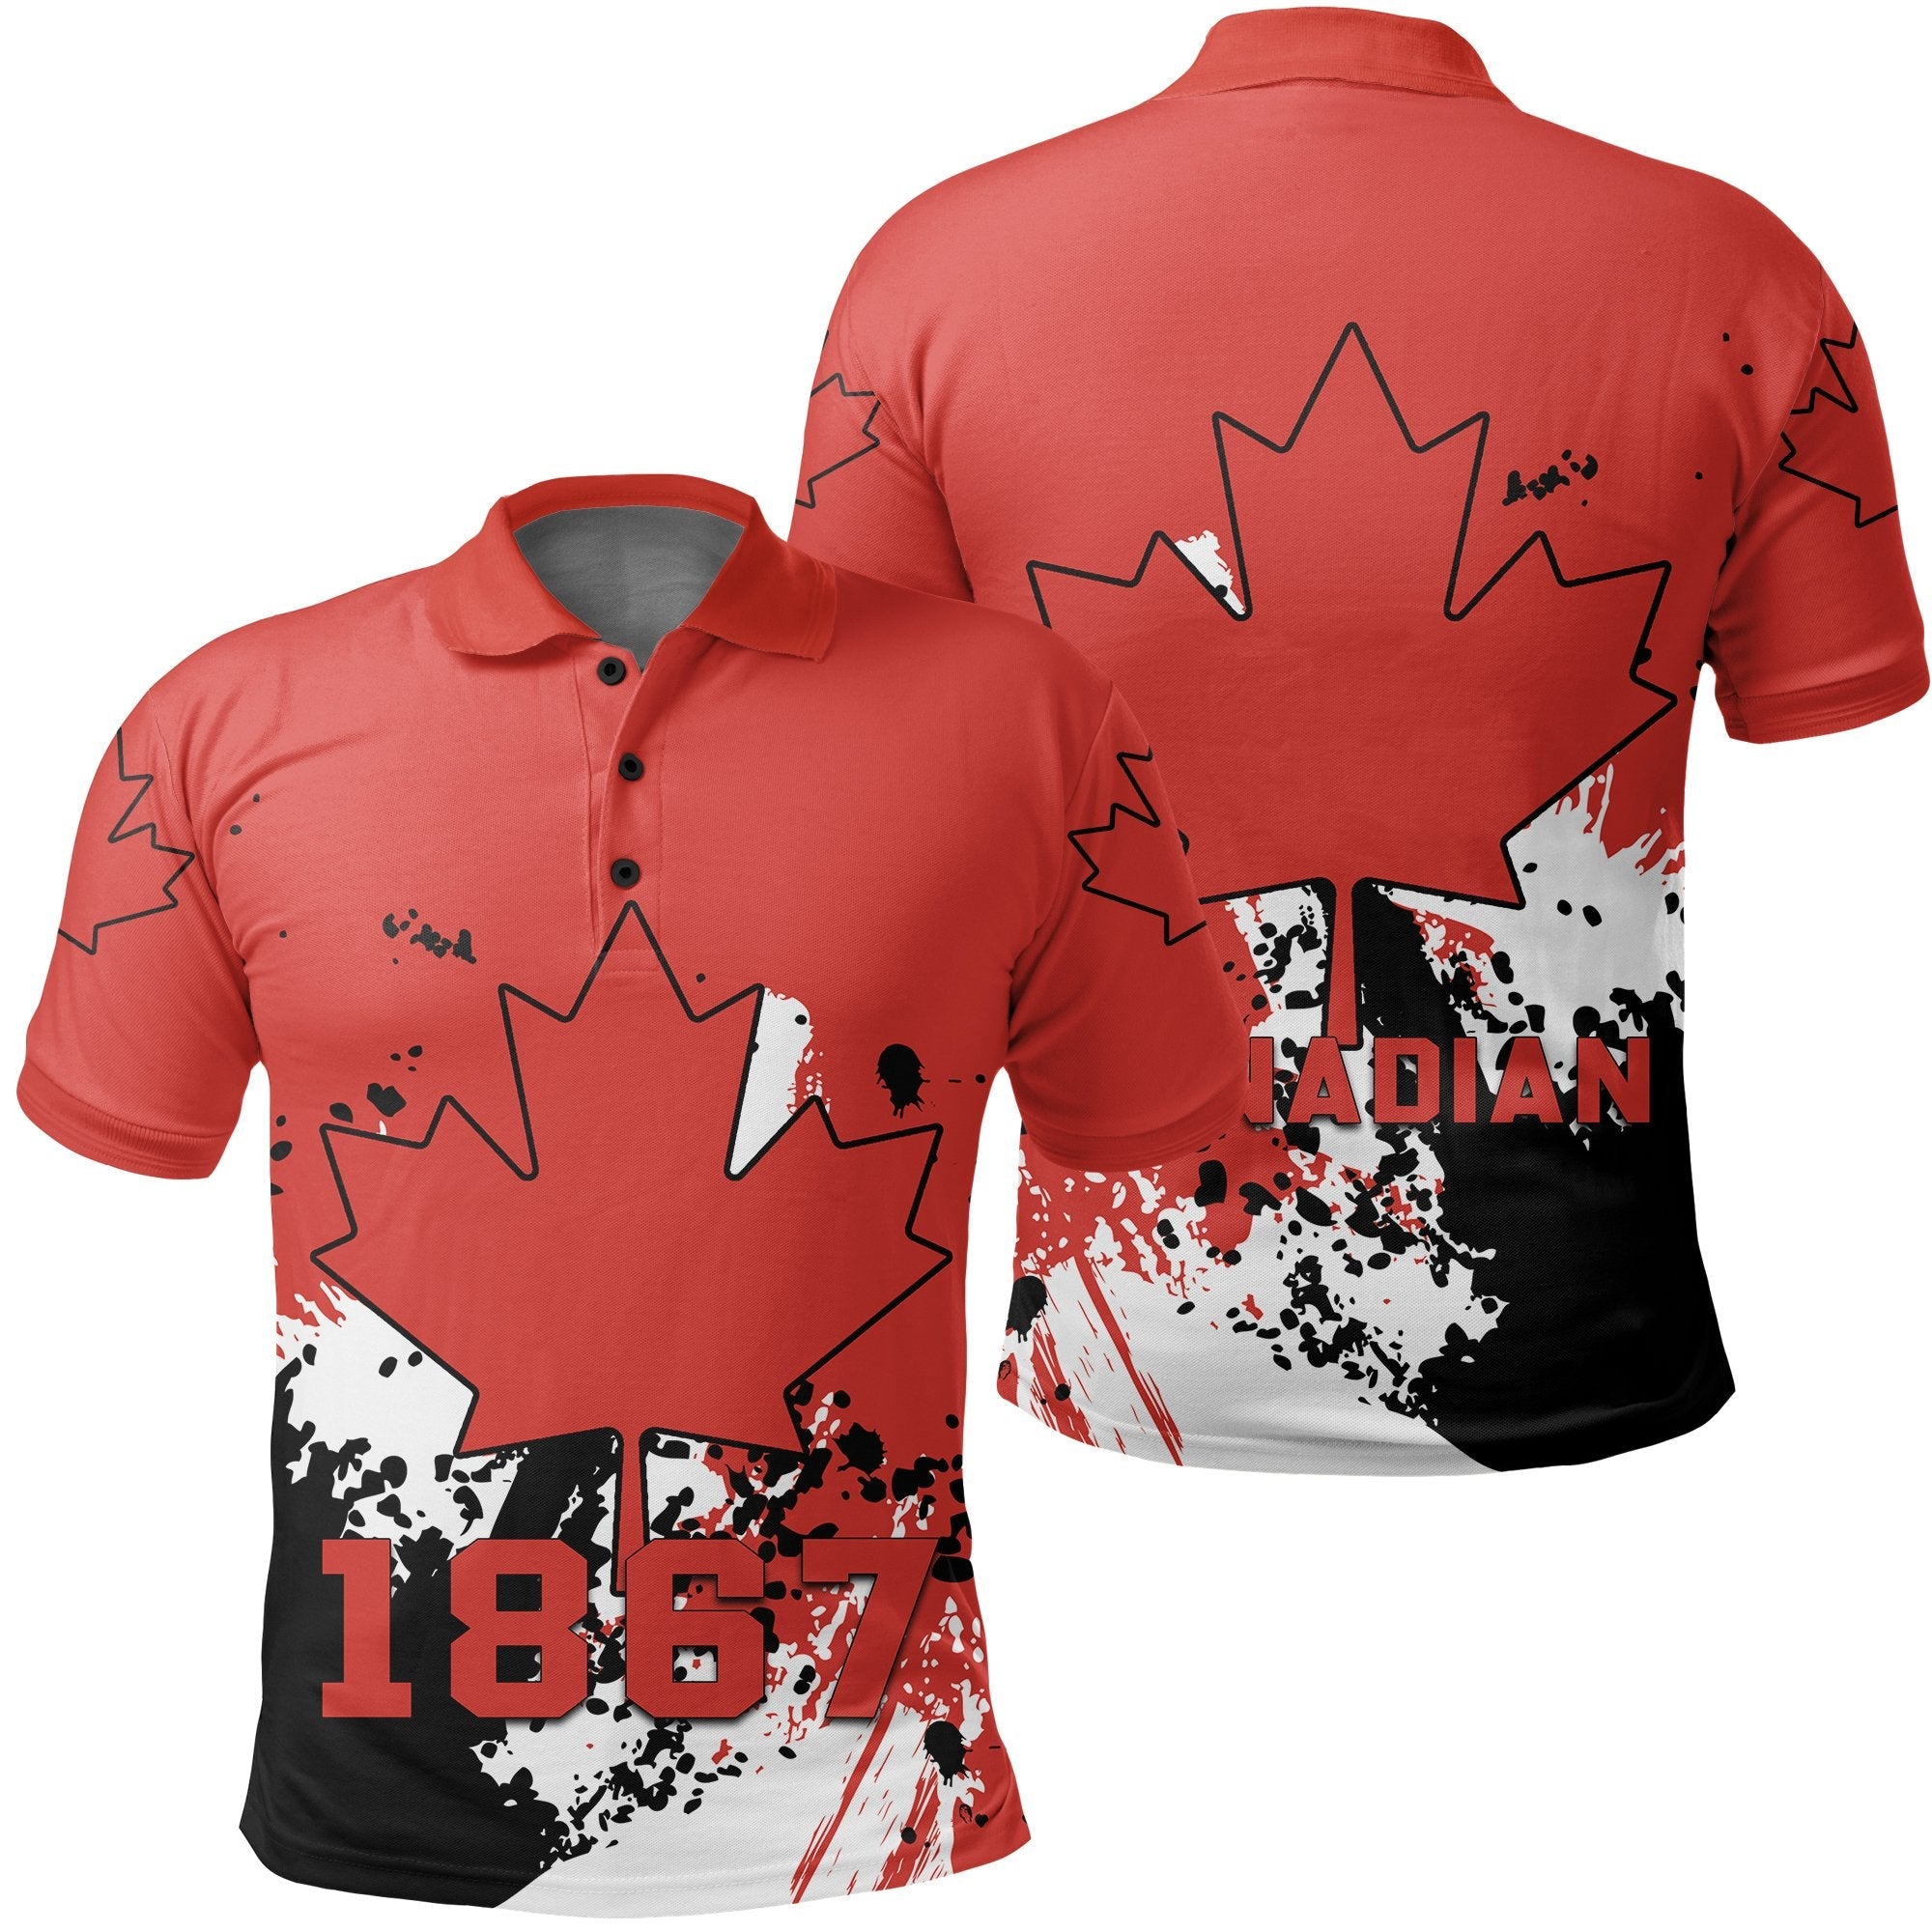 canada-coat-of-arms-polo-shirt-spaint-style